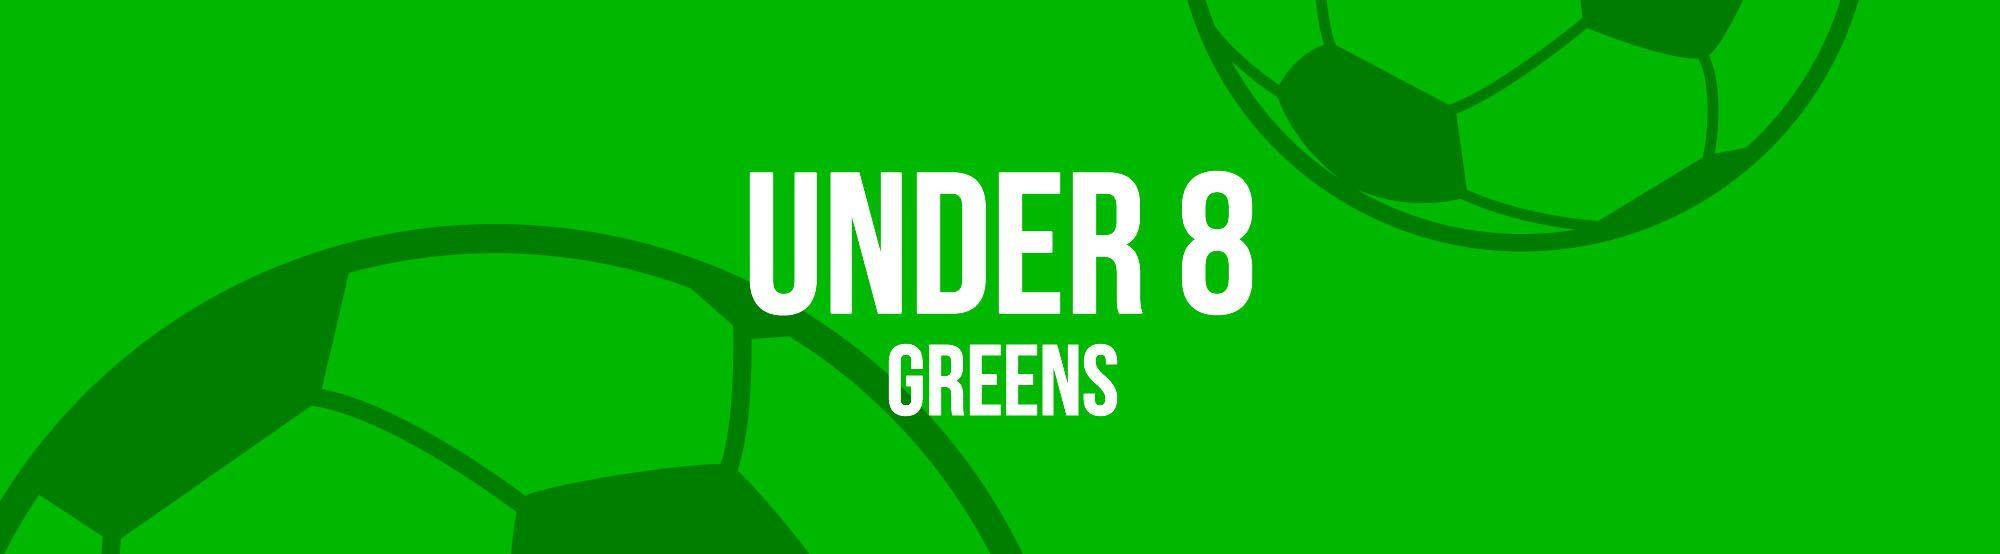 8 Green Logo - Winsor United Football Club First friendly game for Under 8 Green